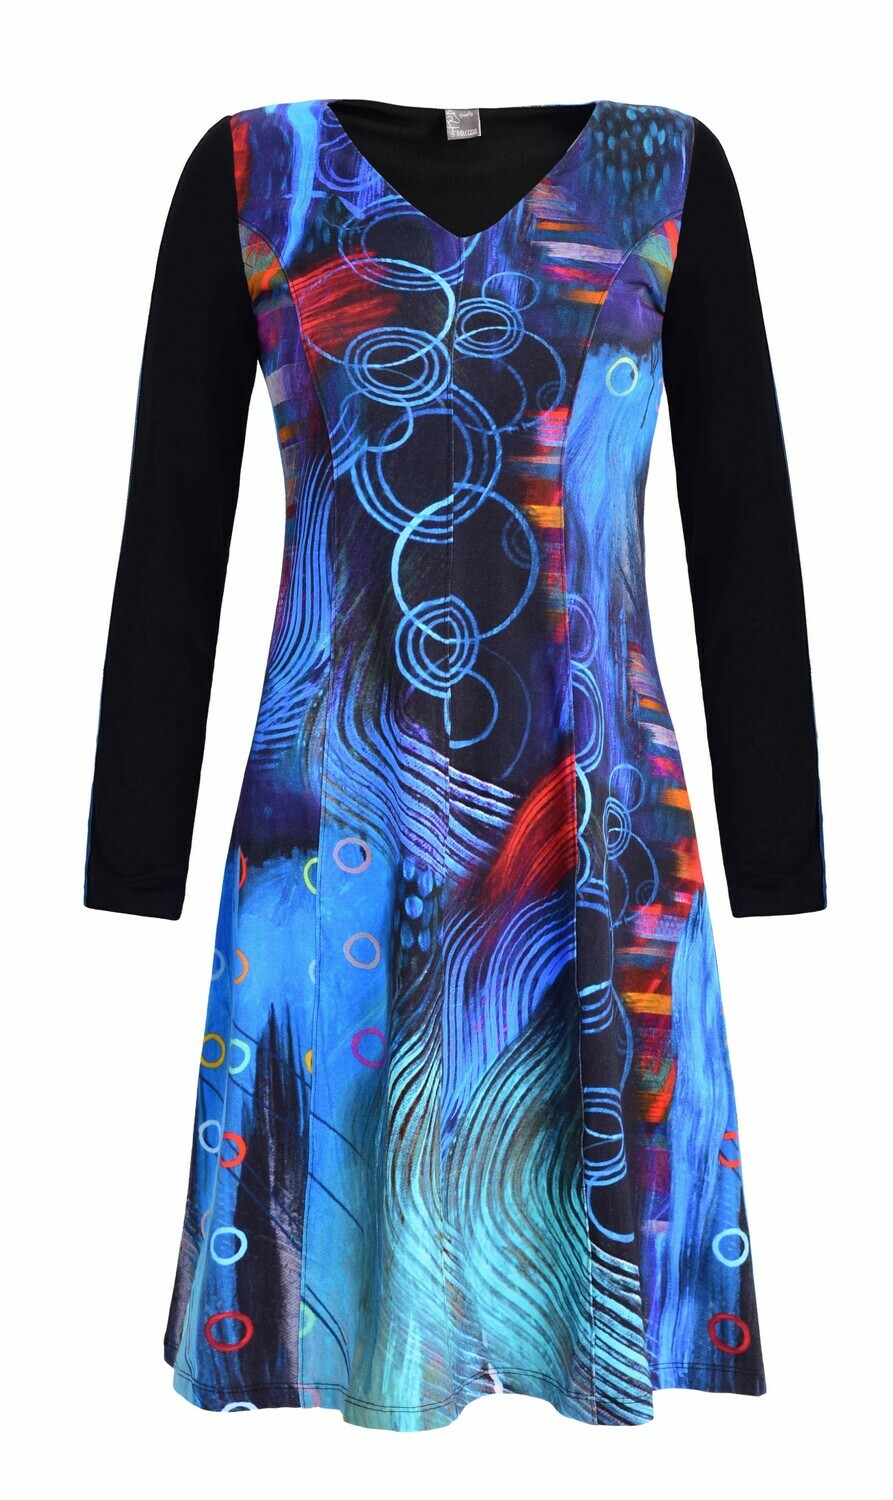 Simply Art Dolcezza: Distilling Color Fit & Flare Abstract Art Dress SOLD OUT